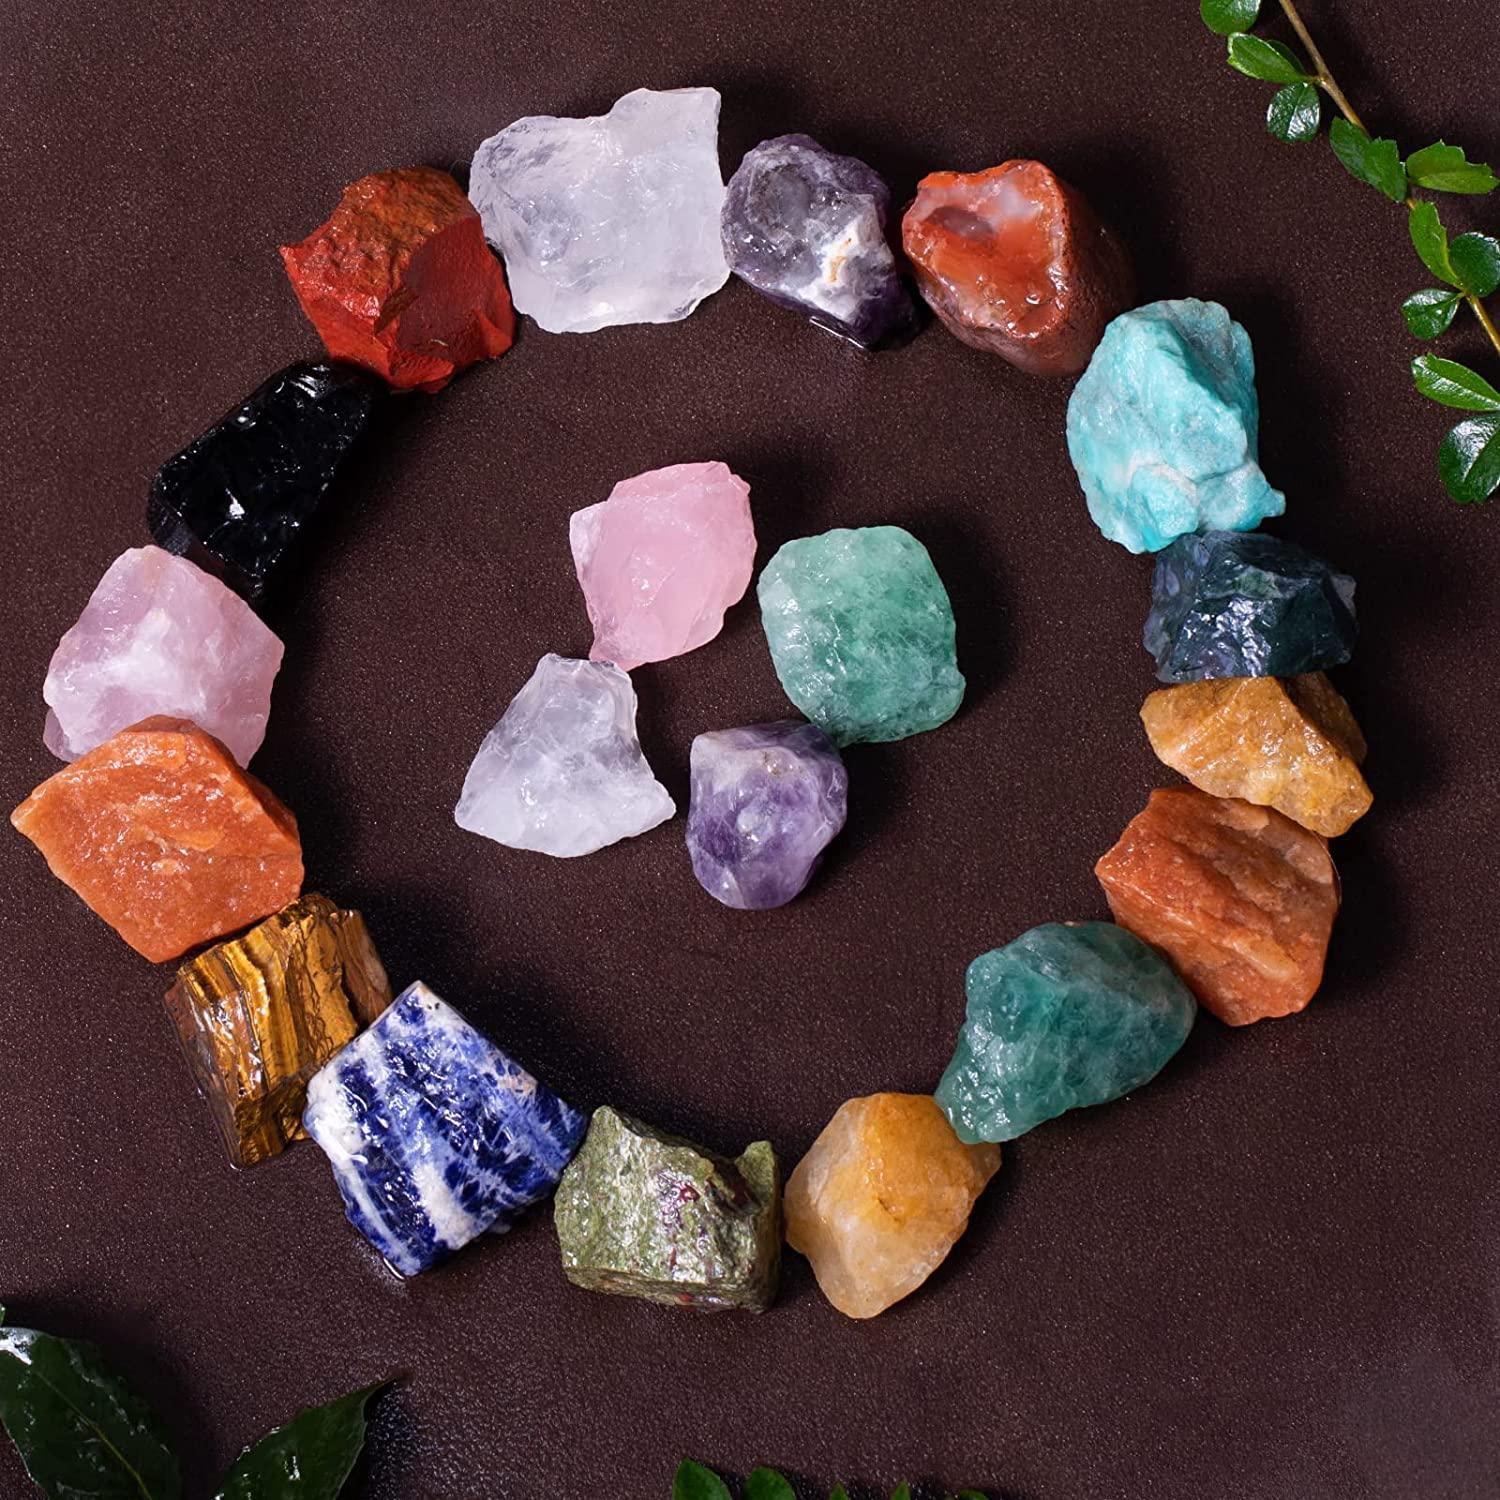 Bulk Lot ite Raw Stone Natural Rough Stones Fountain Rocks for  Tumbling Cabbing Wire Wrapping Wicca Reiki Healing Crystals - AliExpress